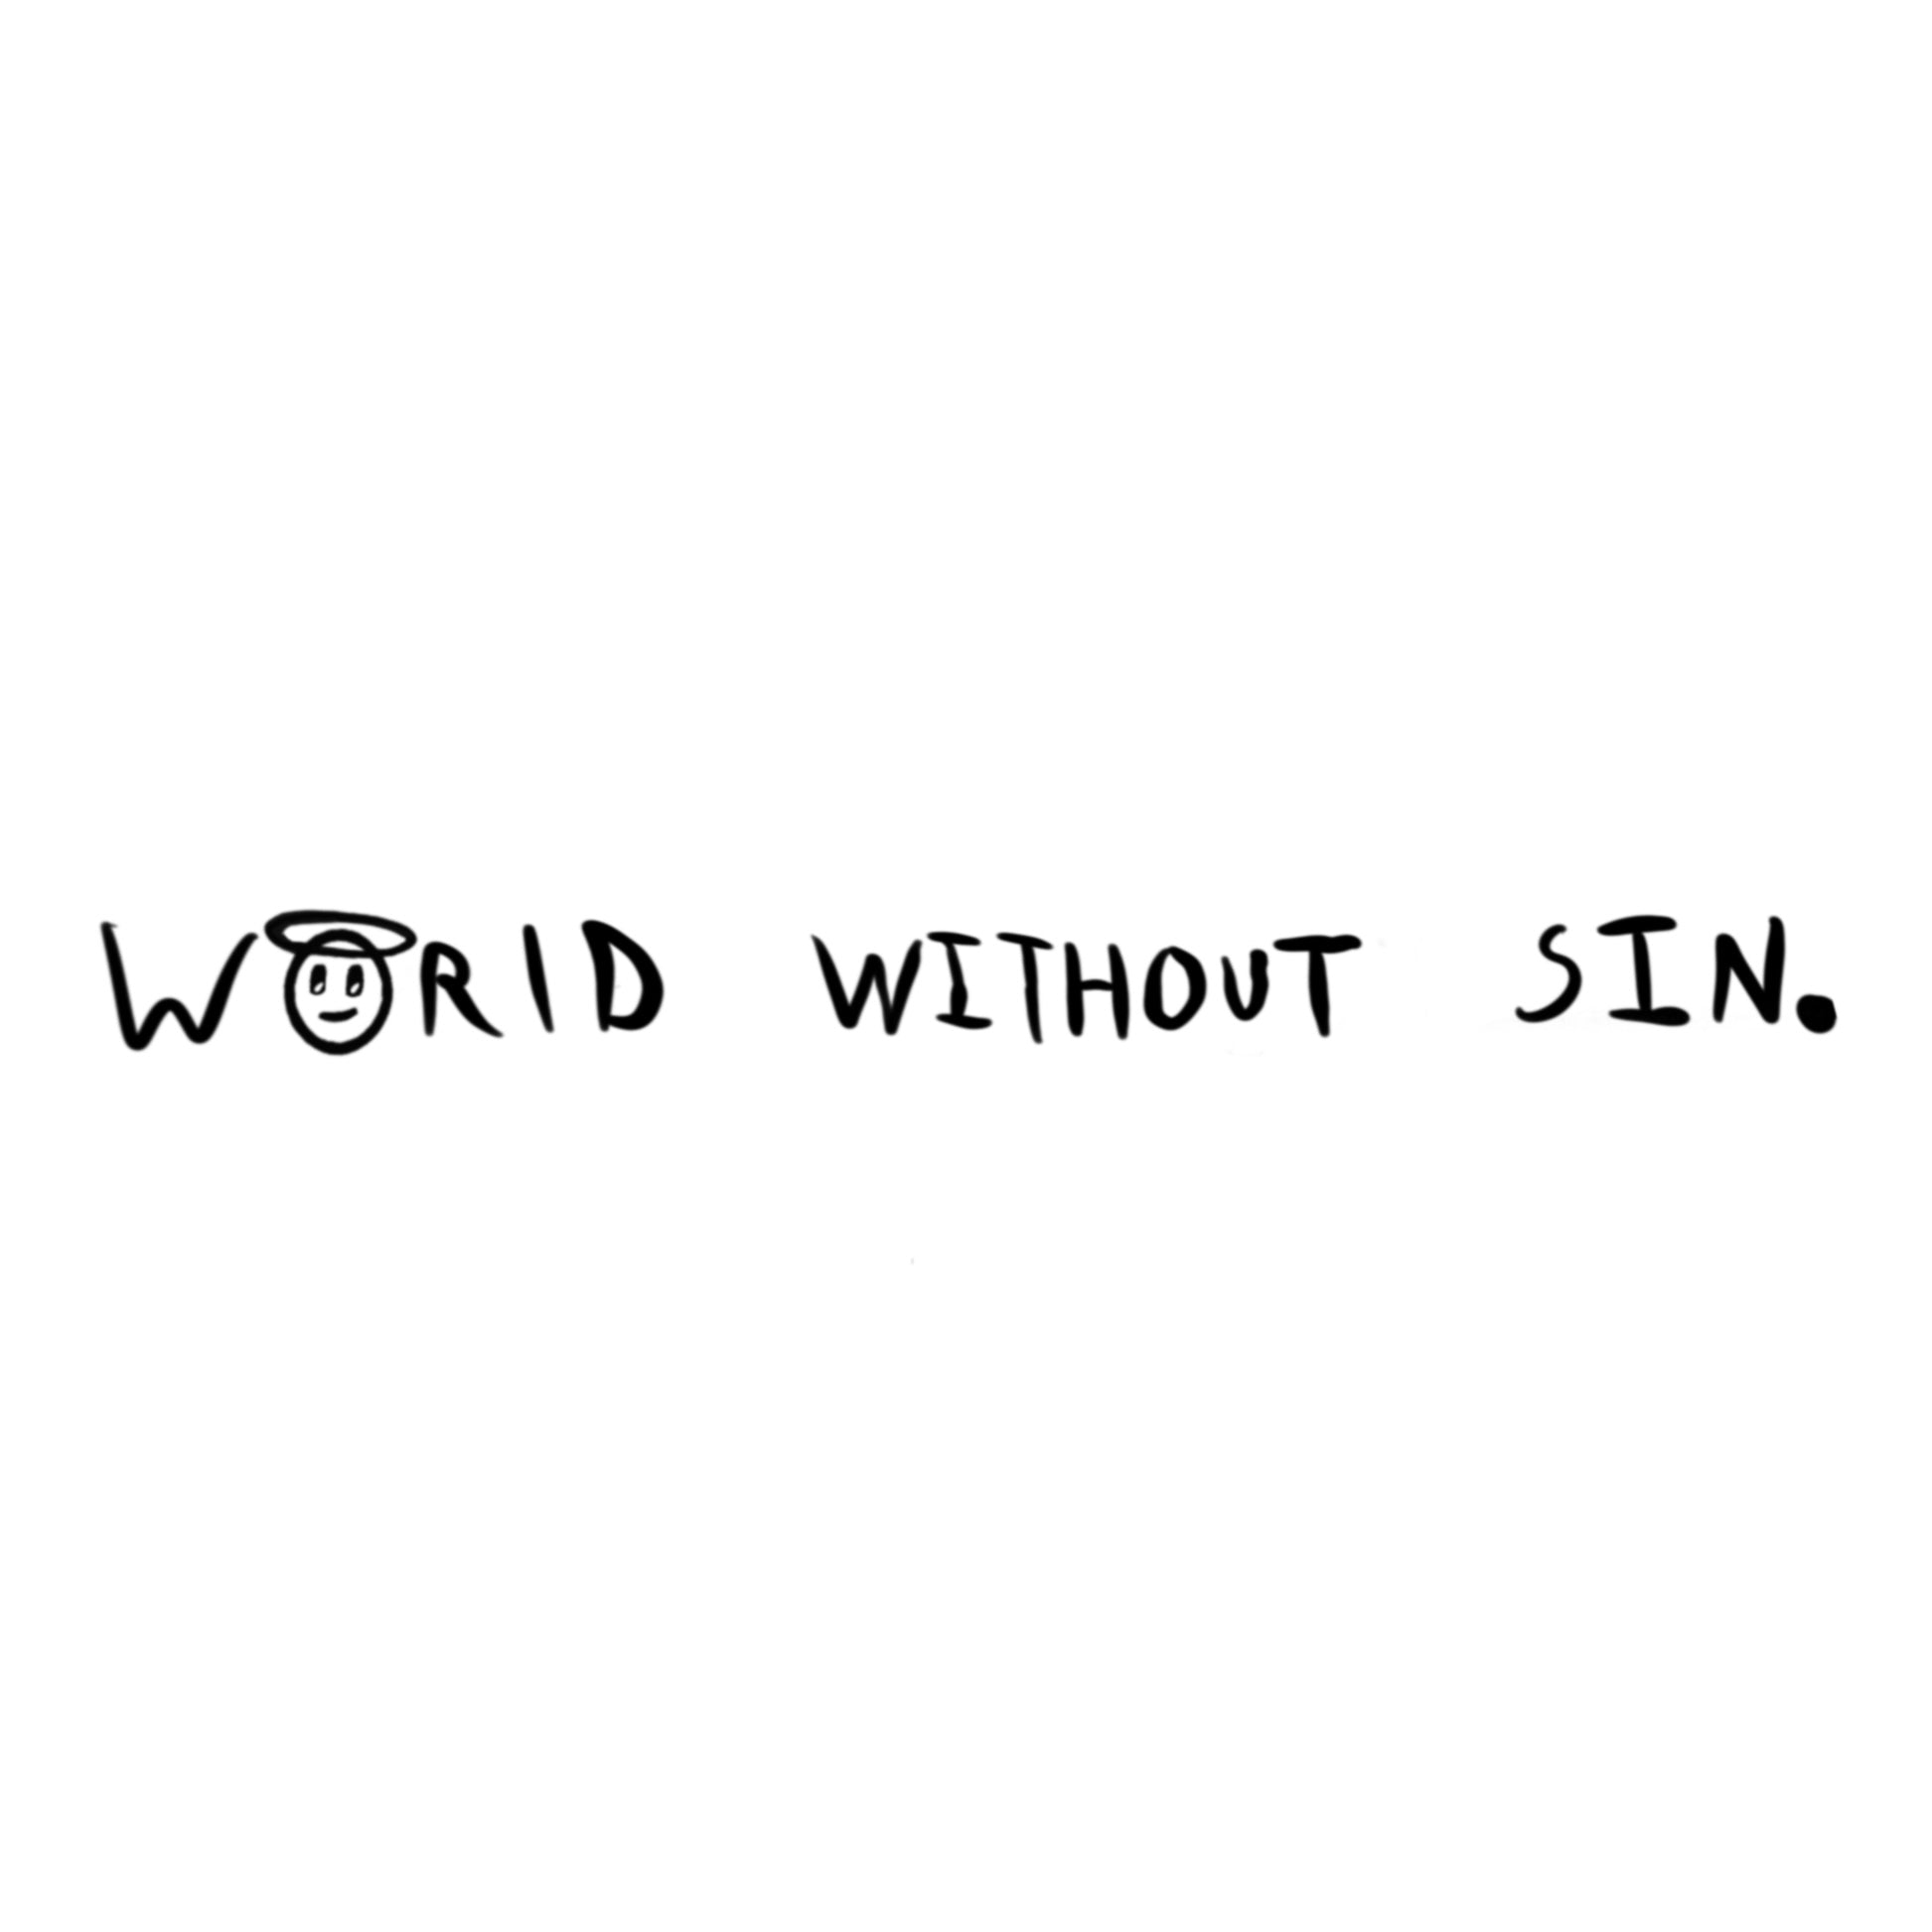 World Without Sin - Clothing Store